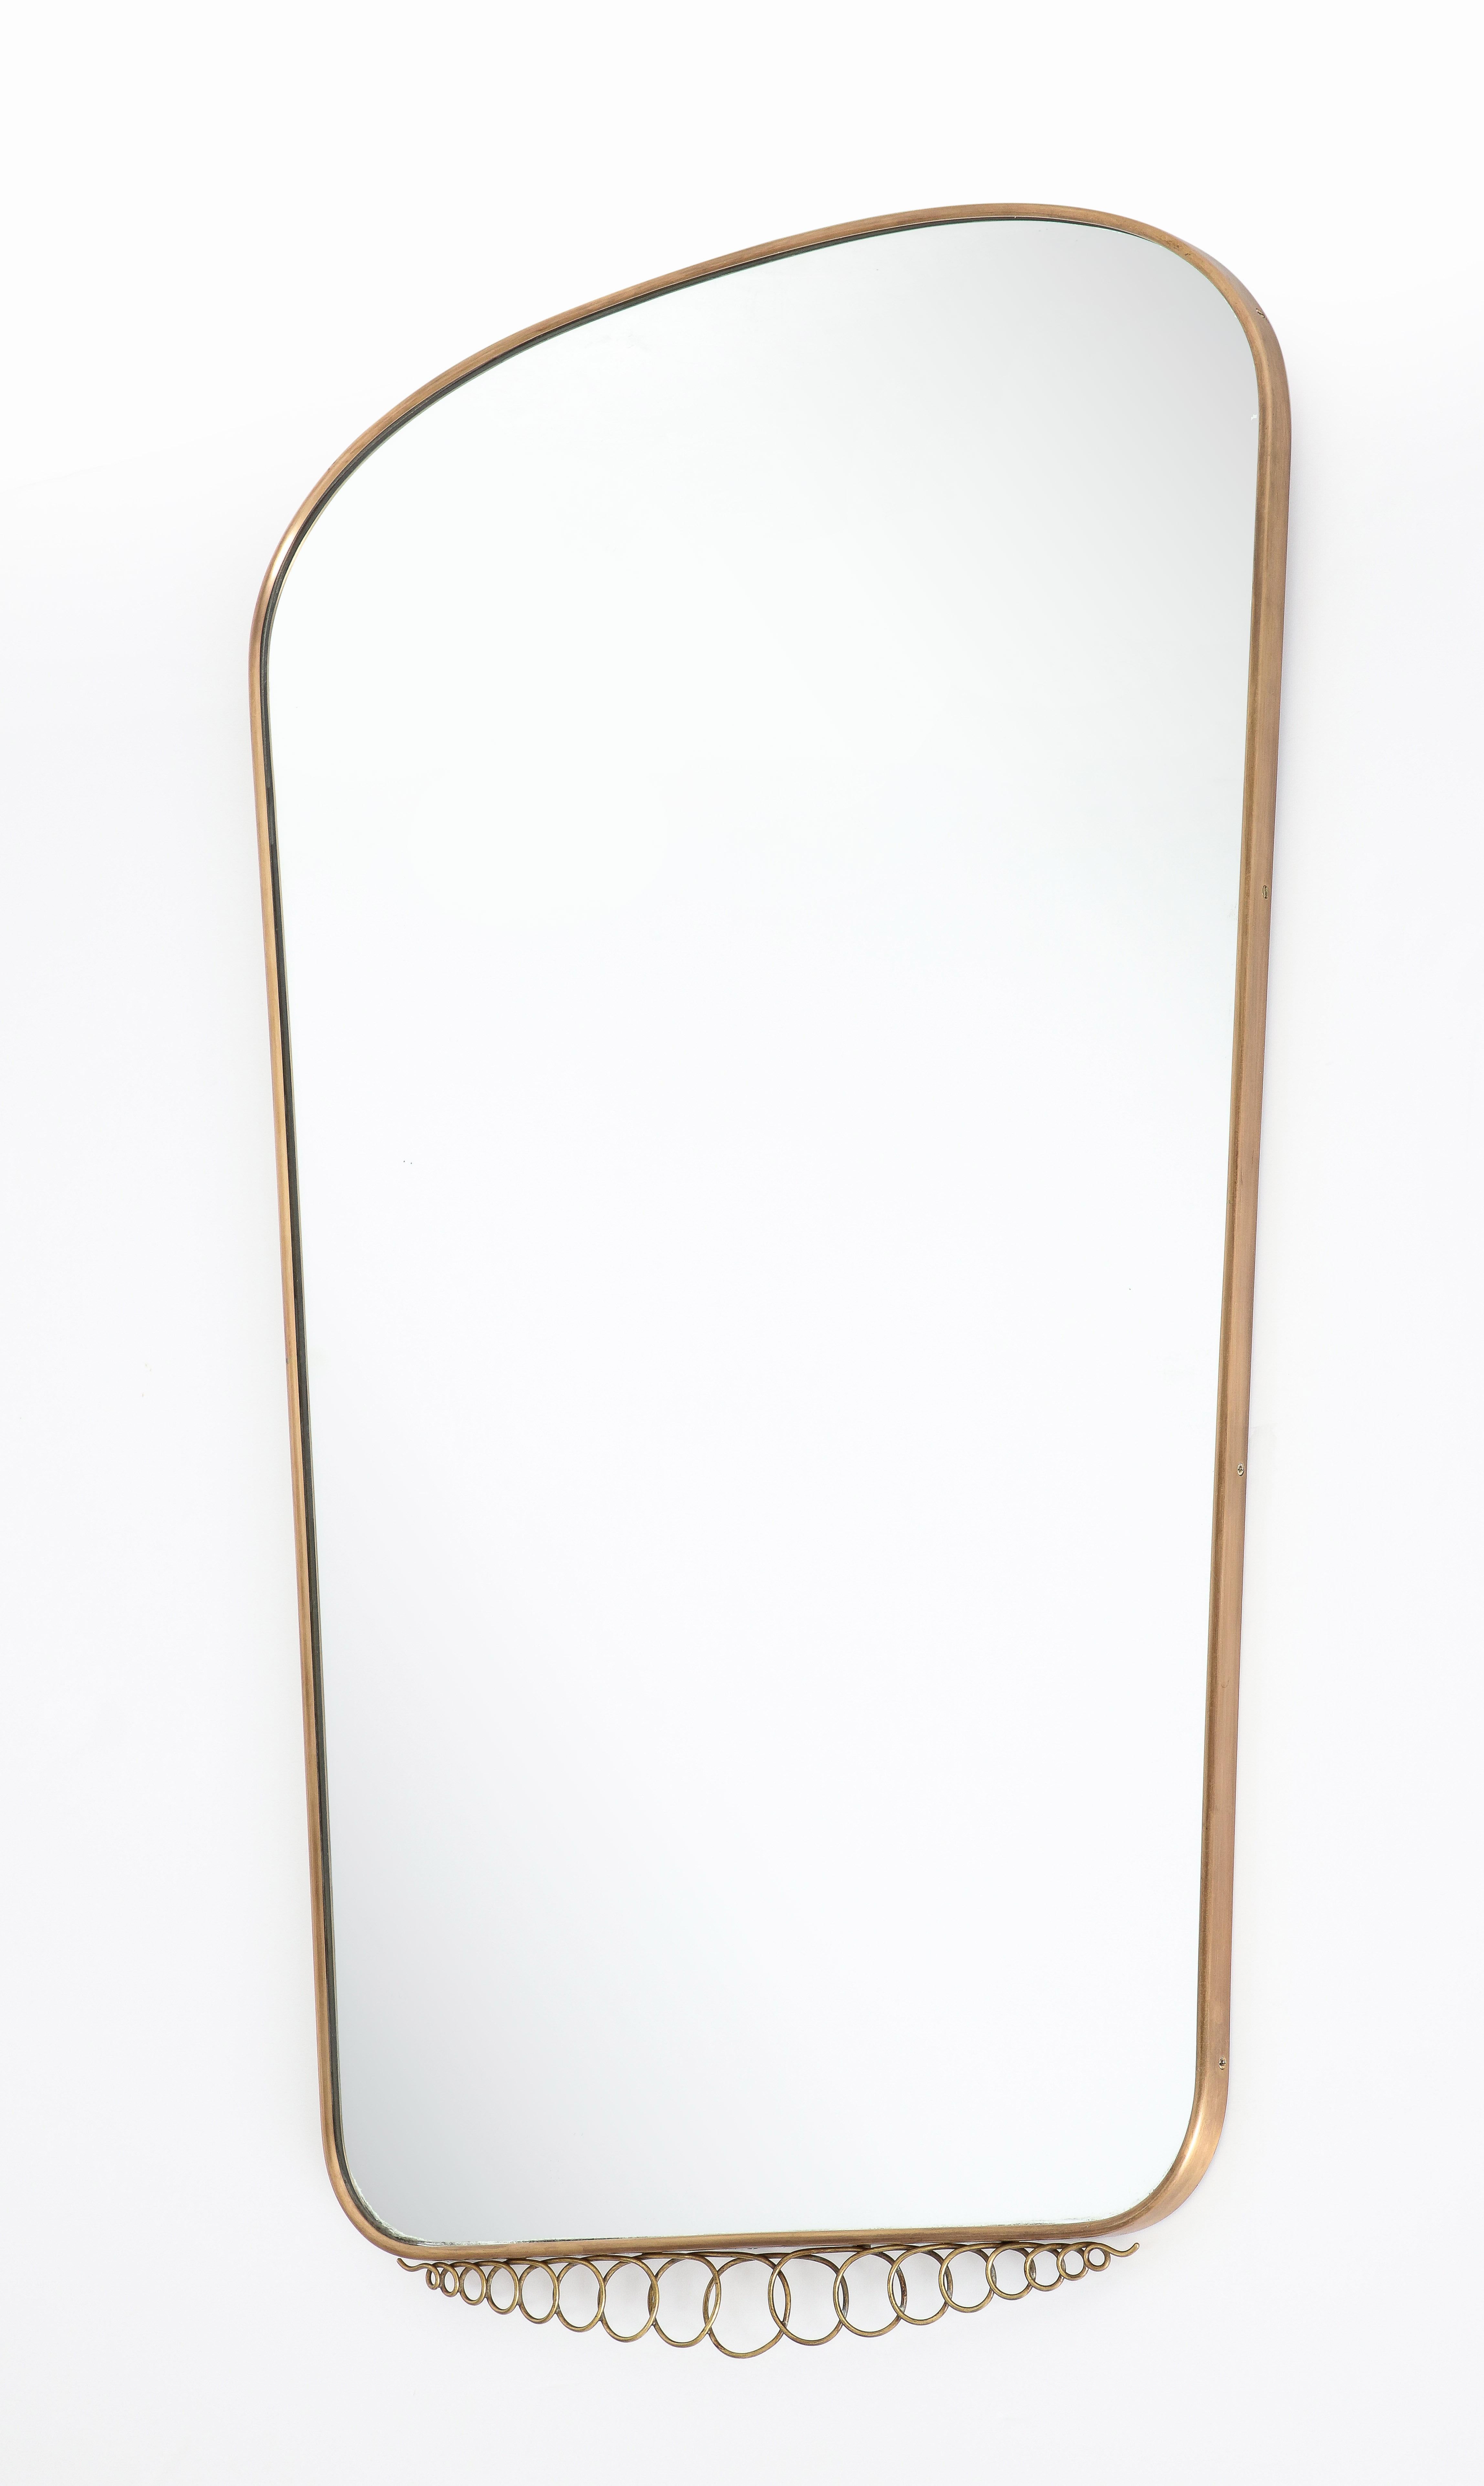 1950s Italian modernist large shaped brass wall mirror with an arched top which tapers towards the bottom with attached lovely decorative brass element. This elegant midcentury mirror illustrates in this playful decorative mount the Italian